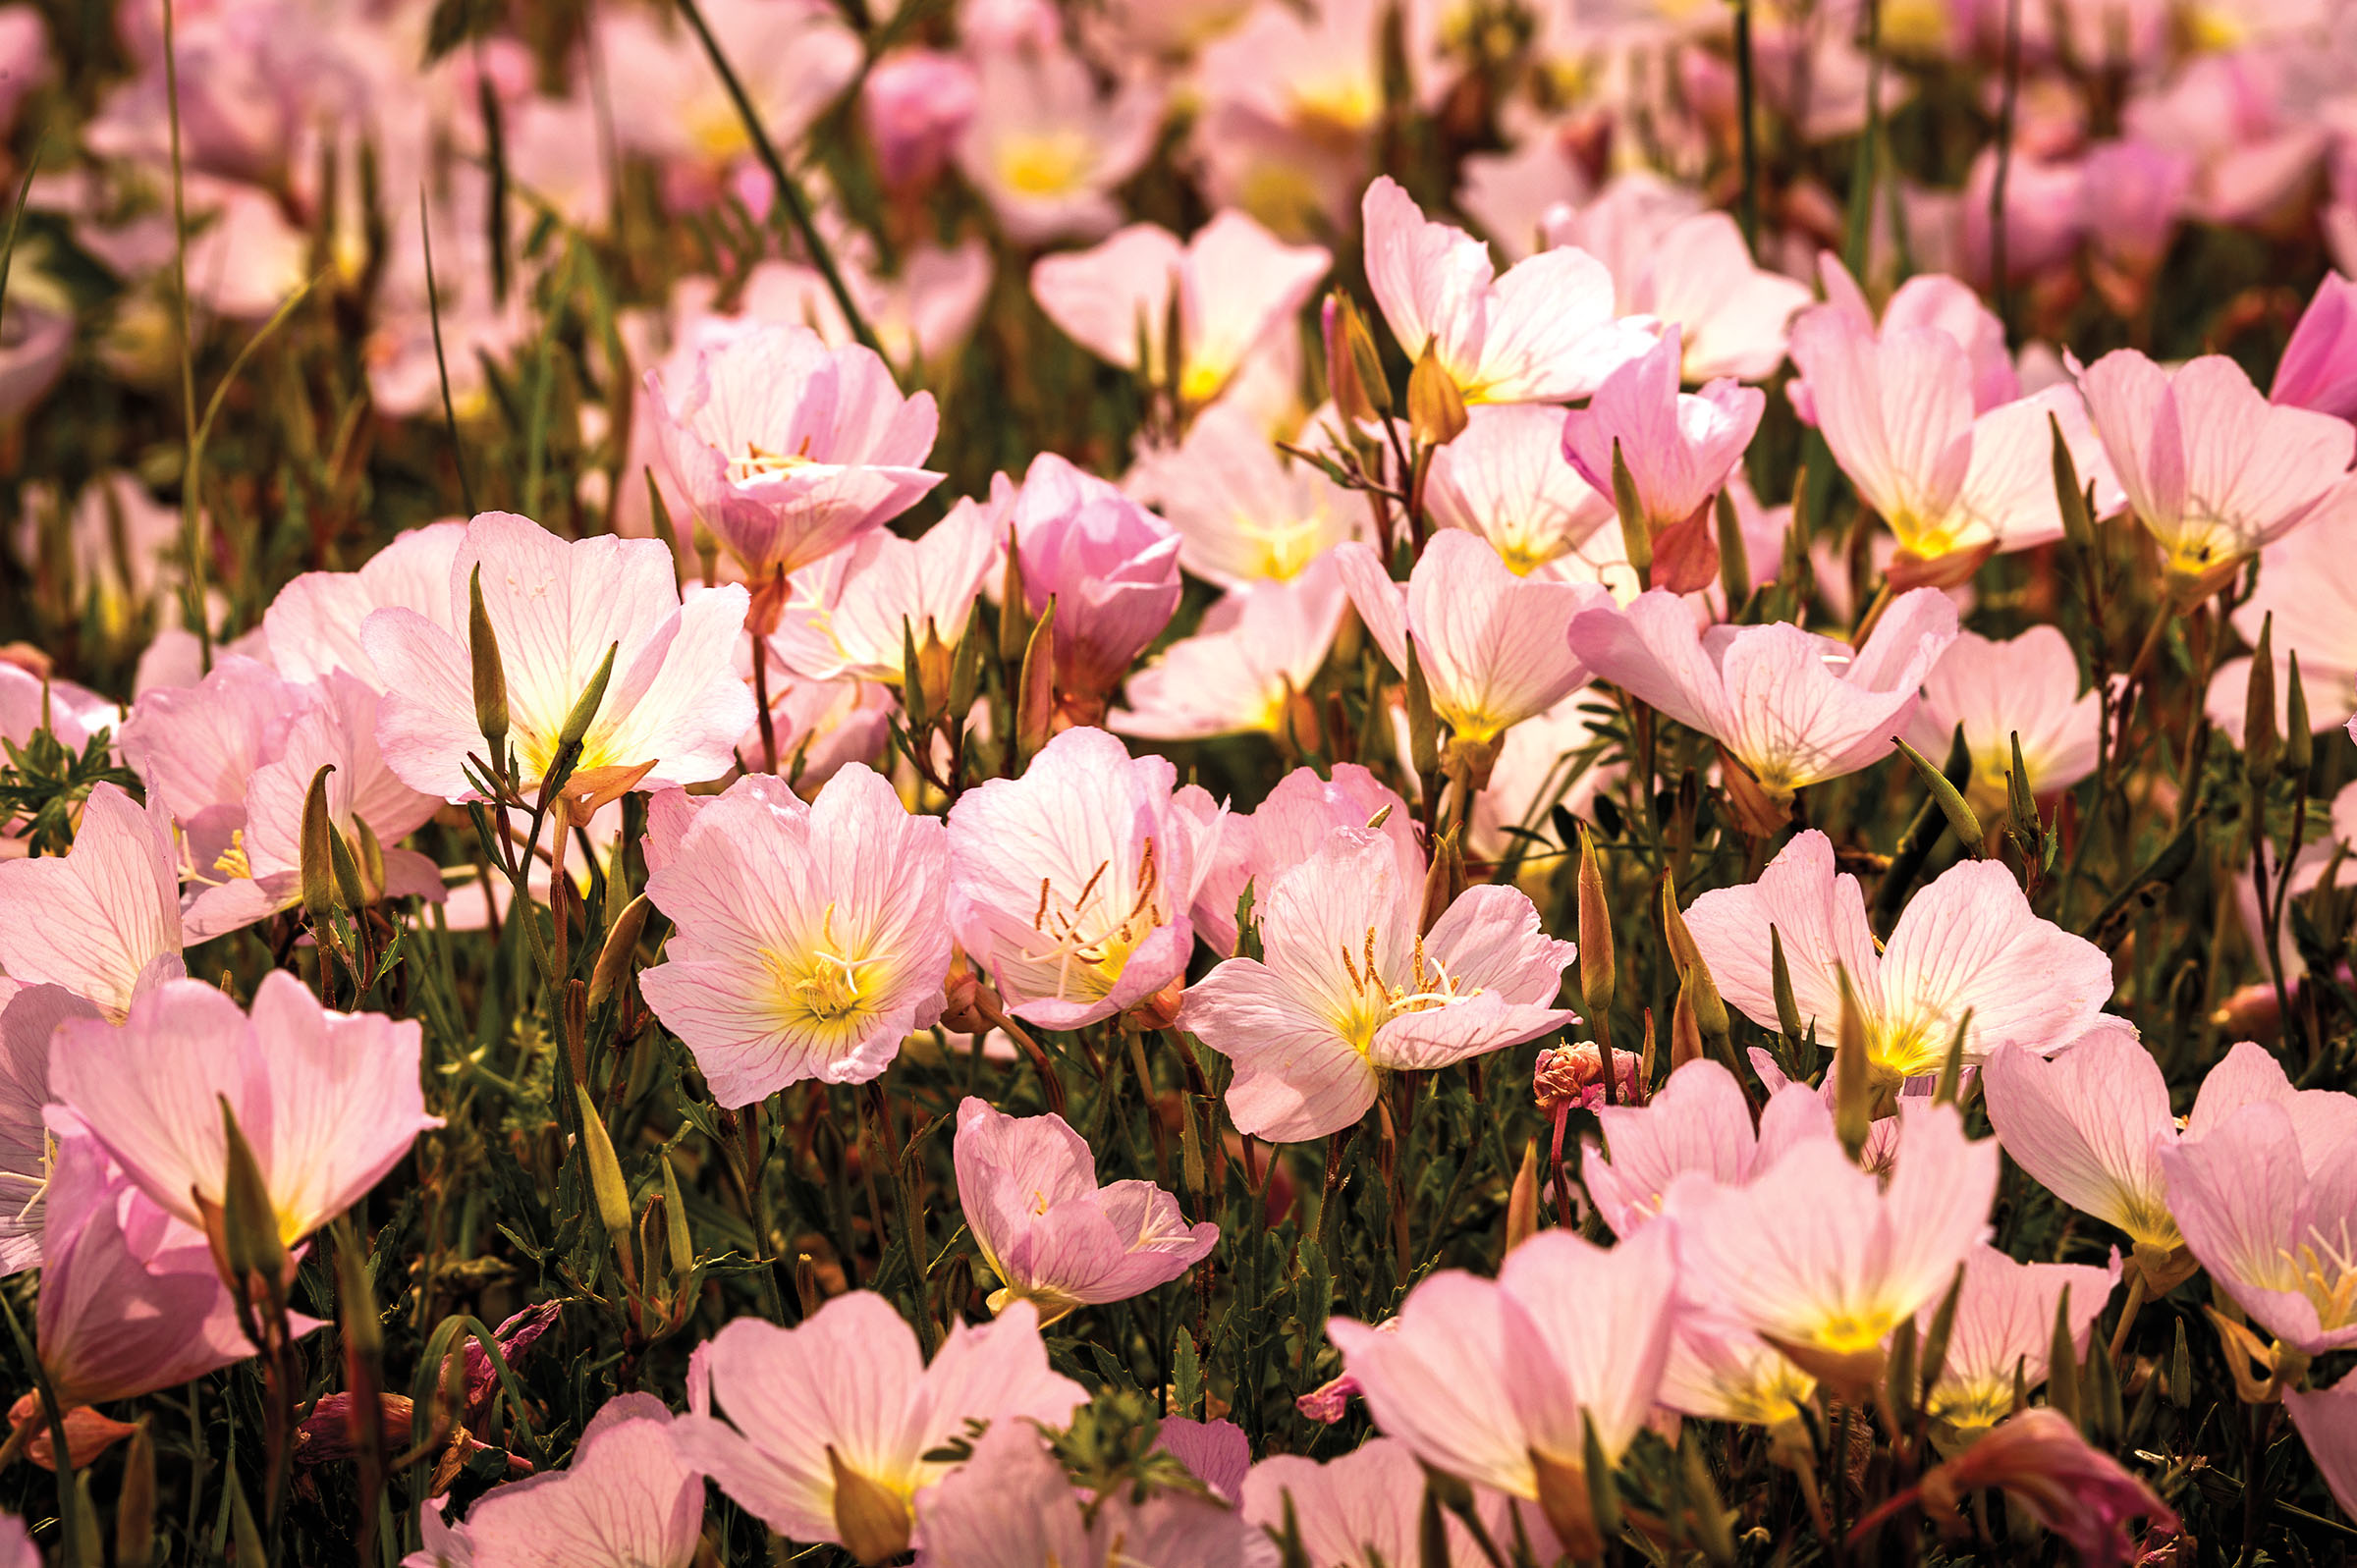 A collection of rosy-pink flowers in a field of green